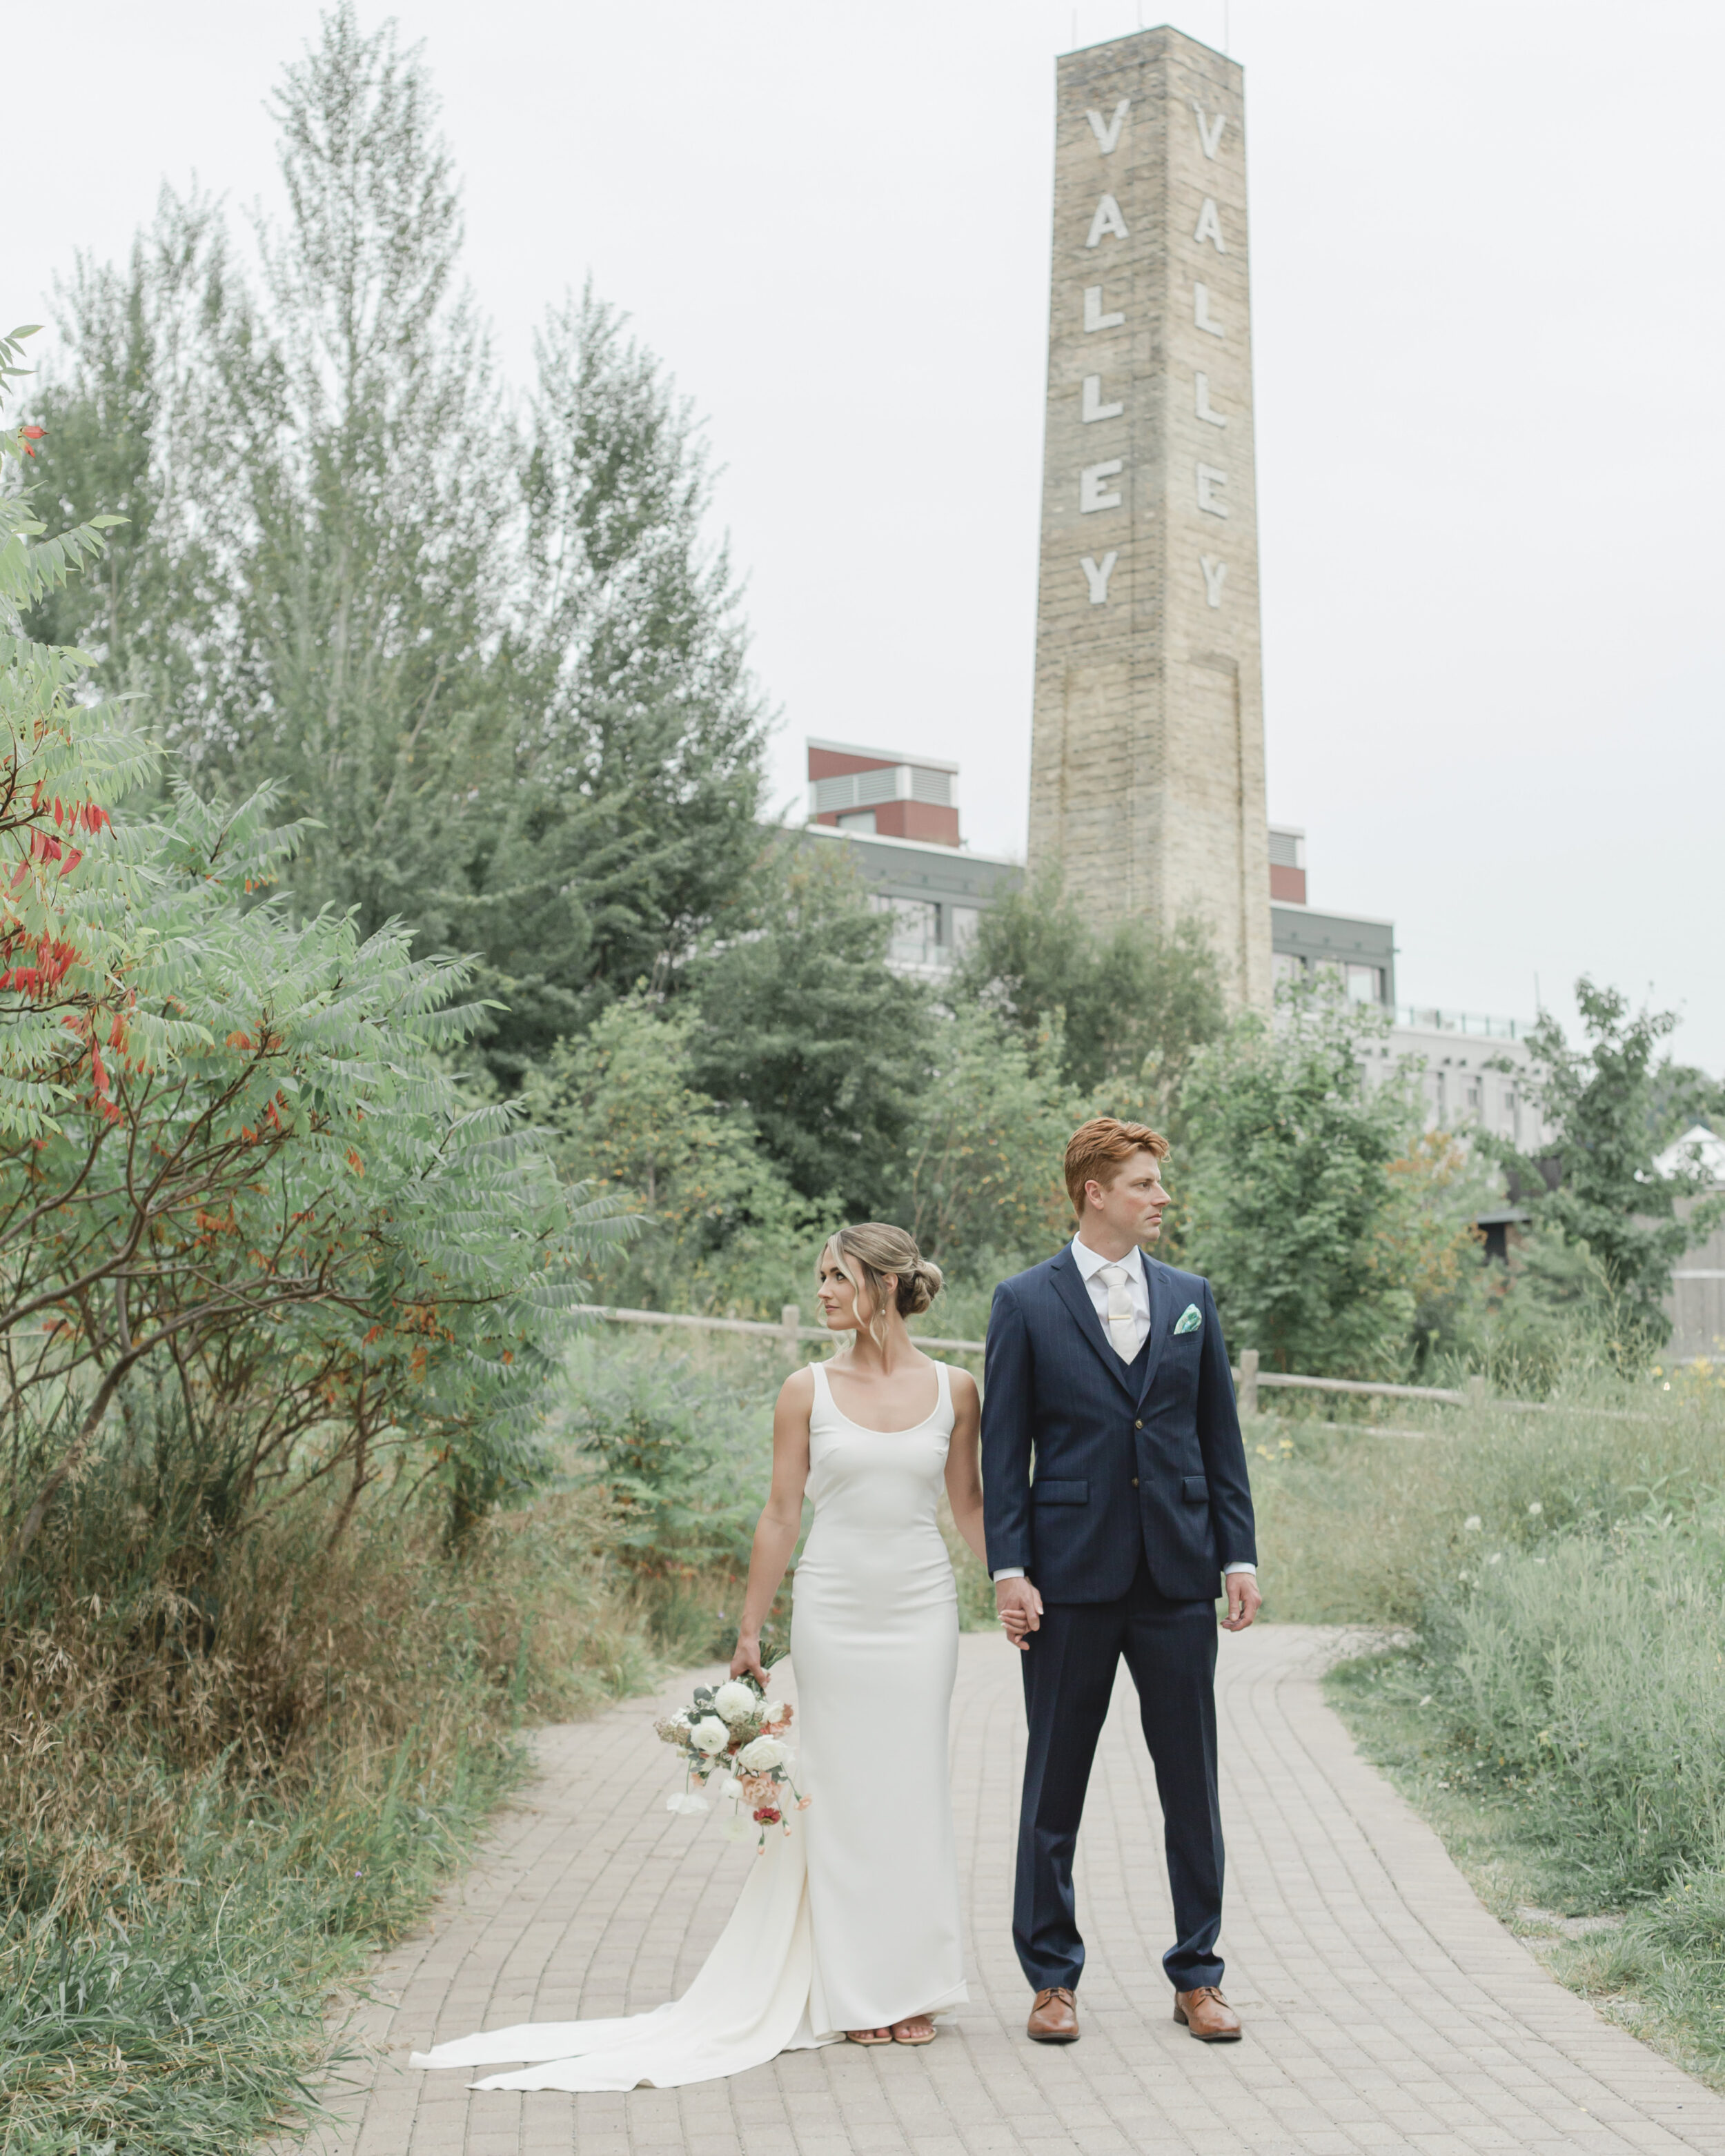 A couple sands in front of Evergreen Brick Words during their elopement in Toronto.